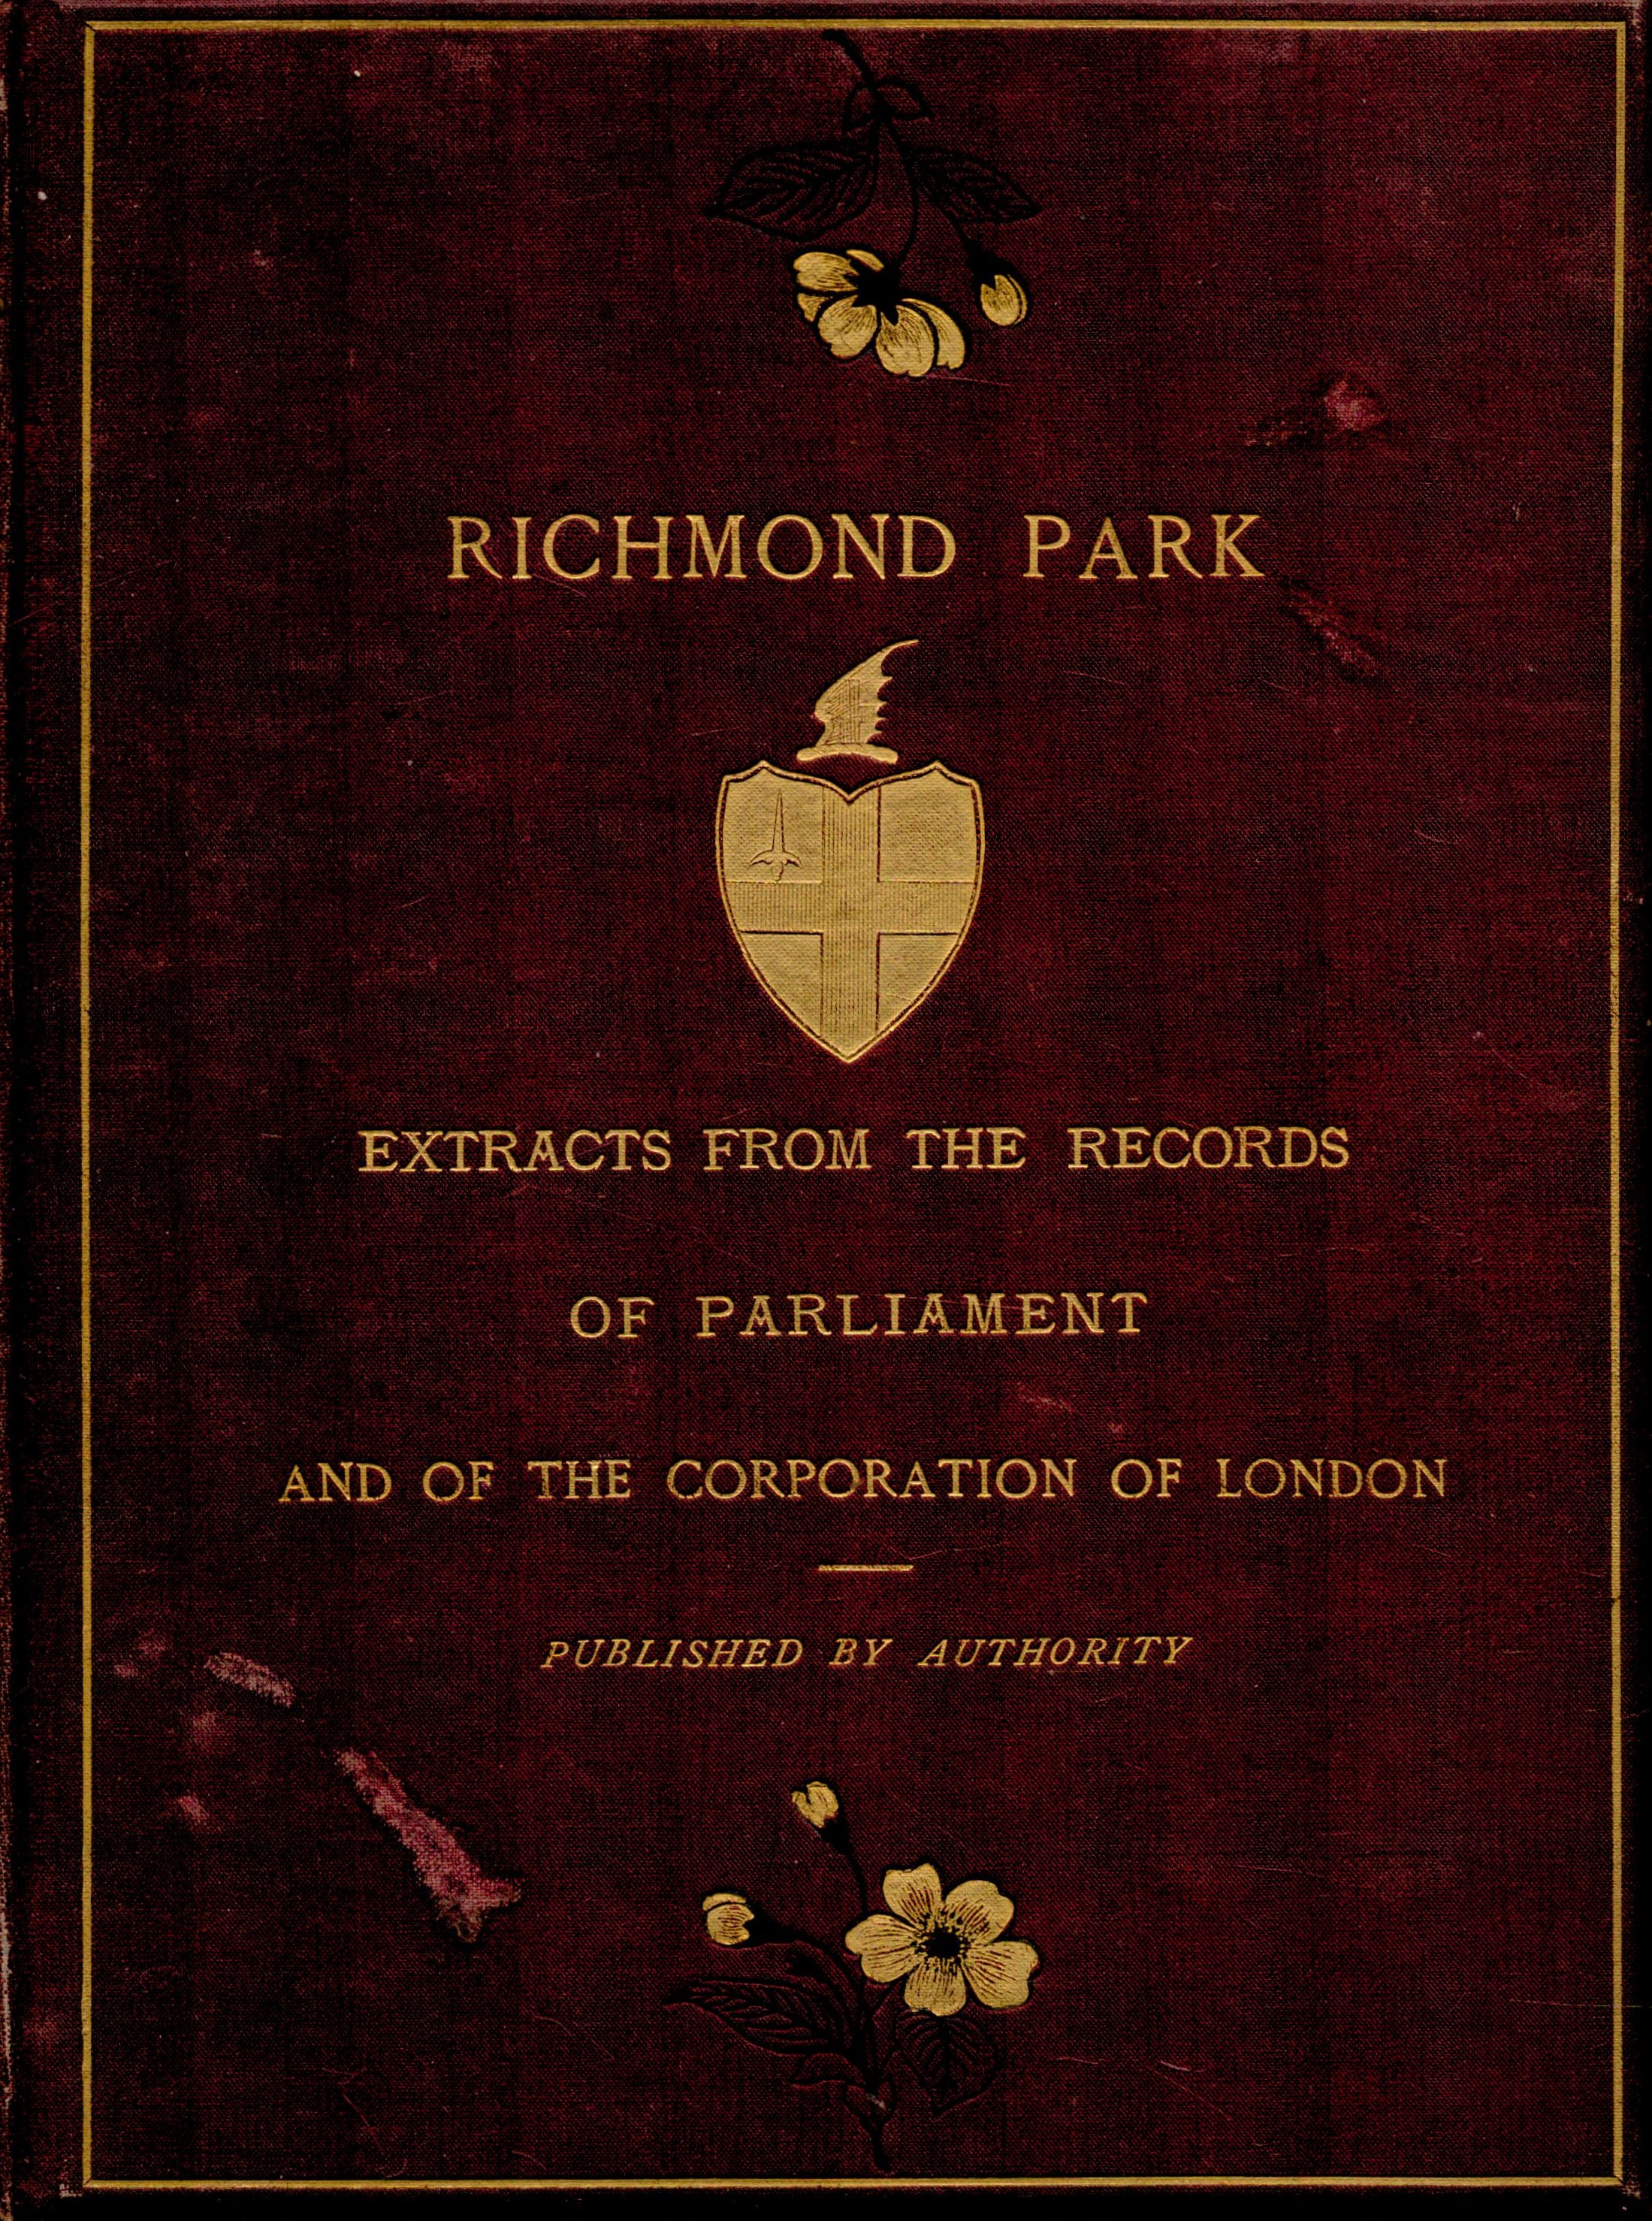 Sir Thomas James Nelson RICHMOND PARK. Extracts from the records of Parliament and of the